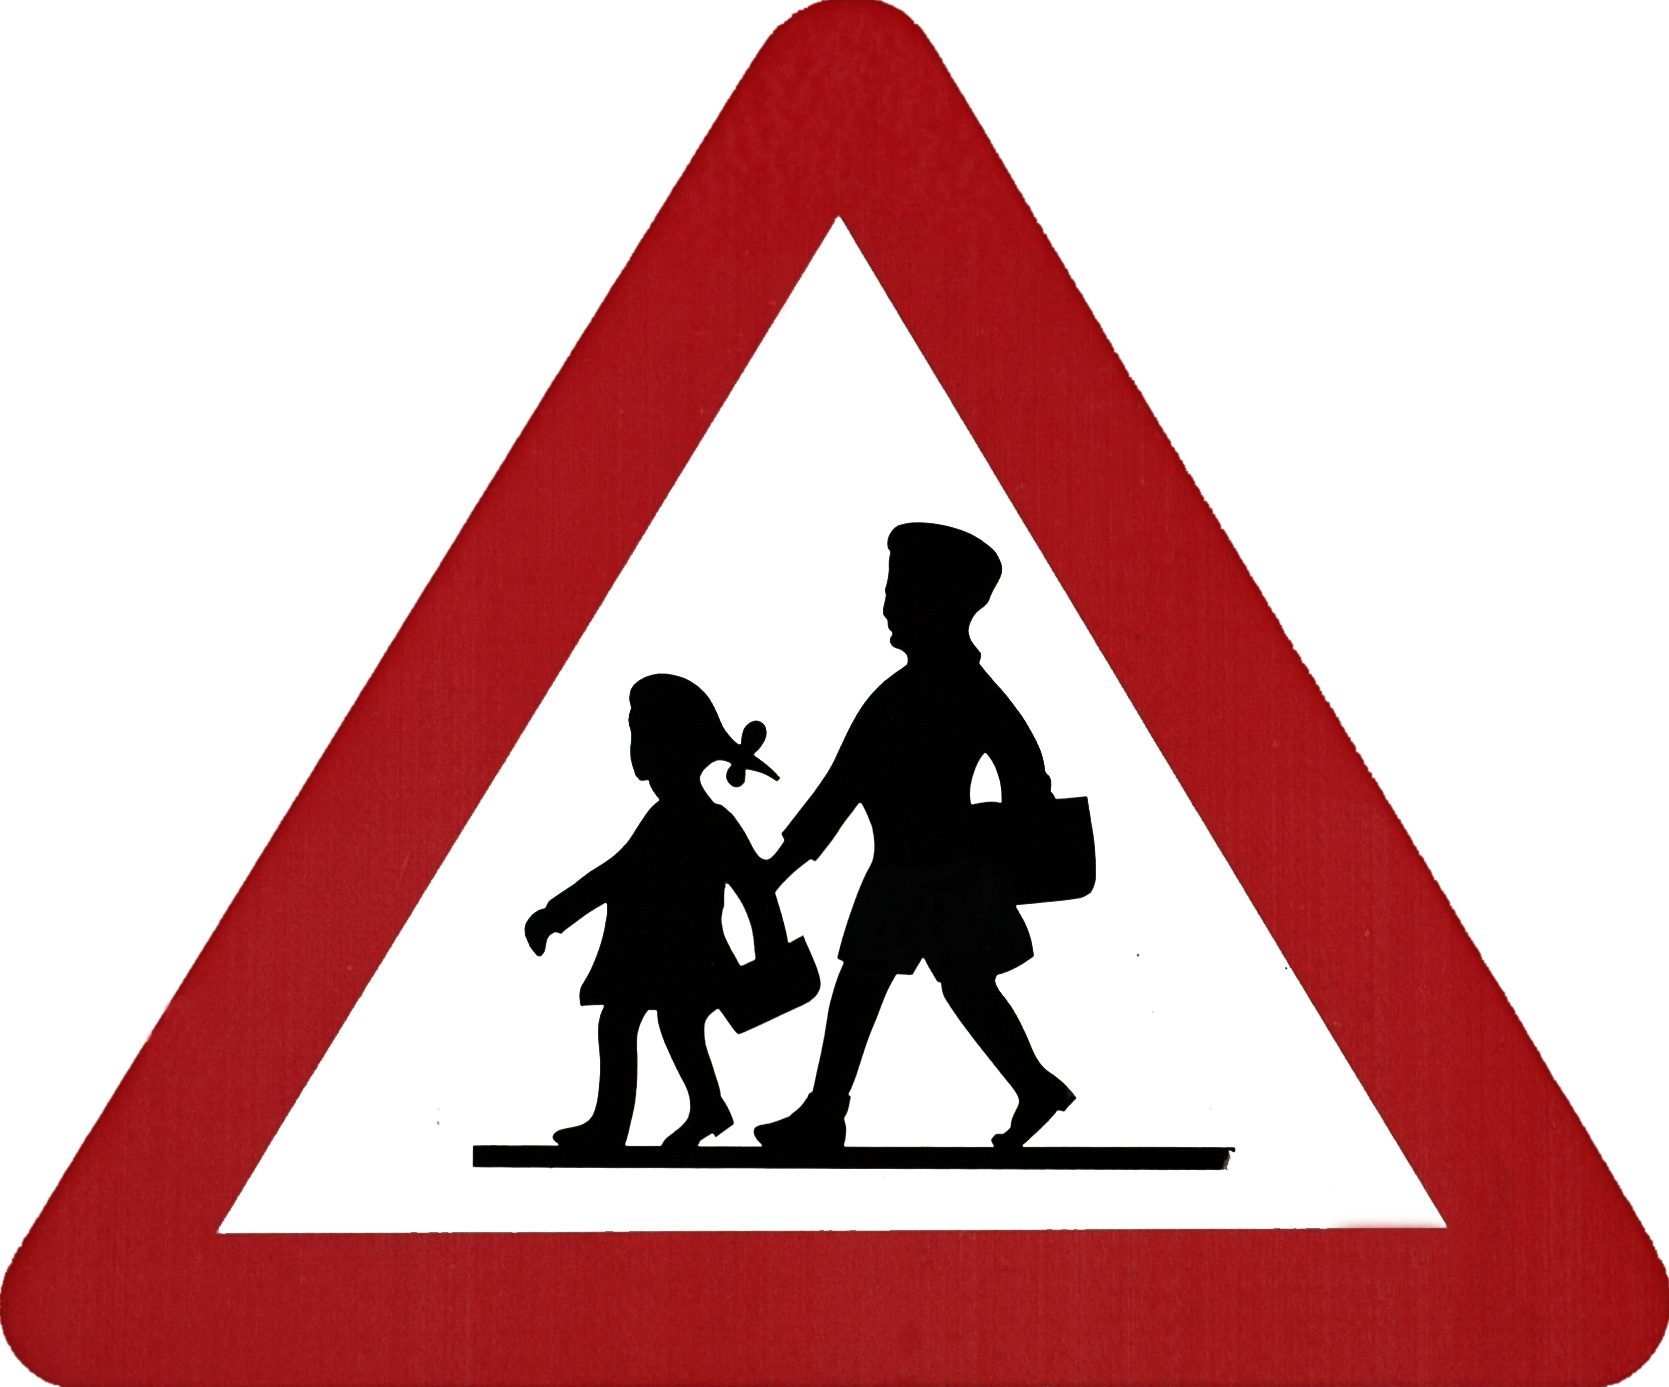 children-crossing-triangle-sign - RoadCover - ClipArt Best ...